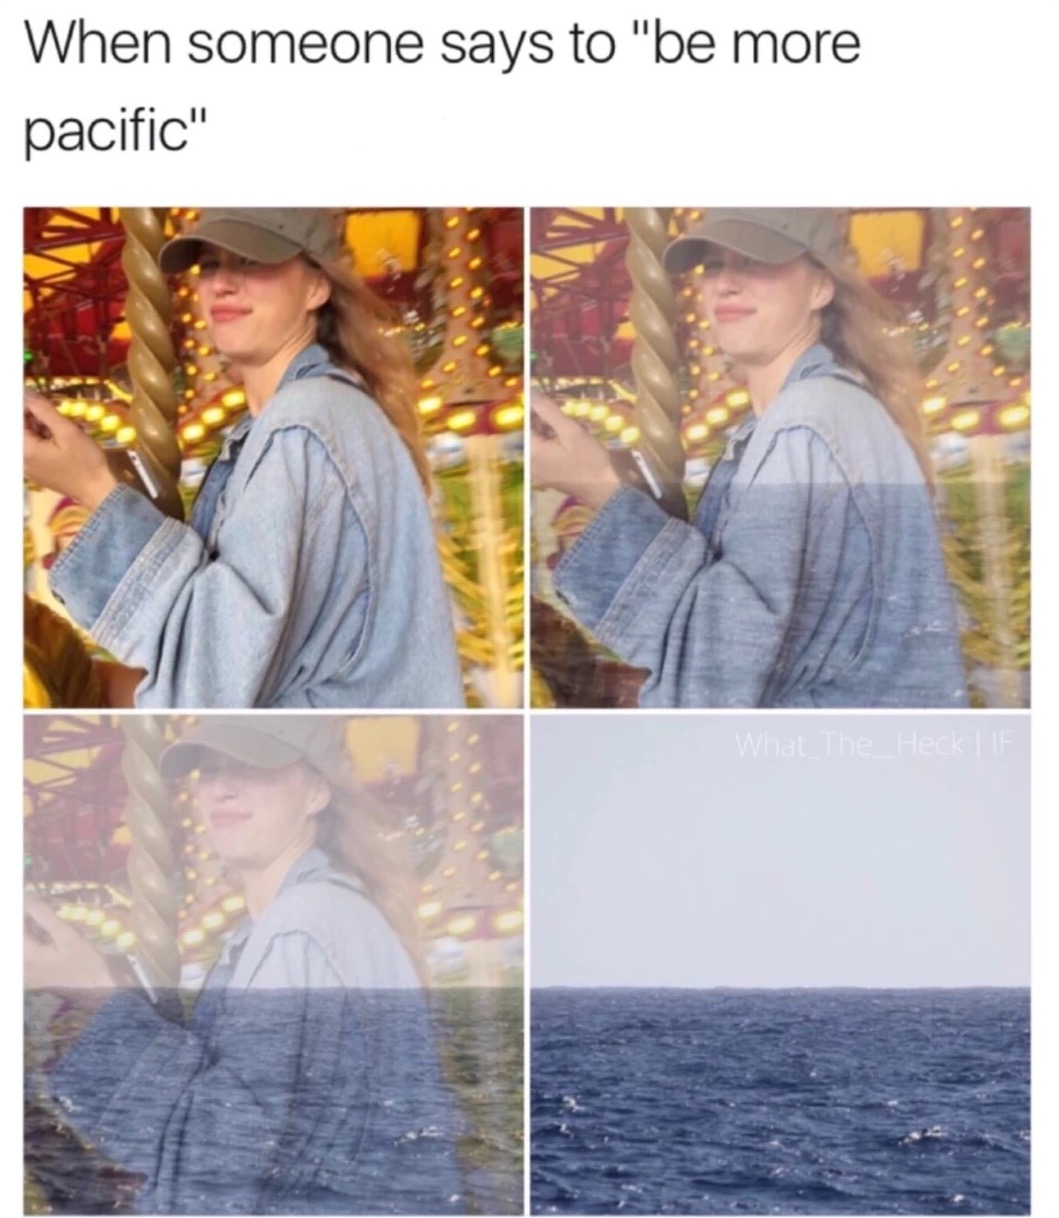 Be more Pacific, as in the ocean